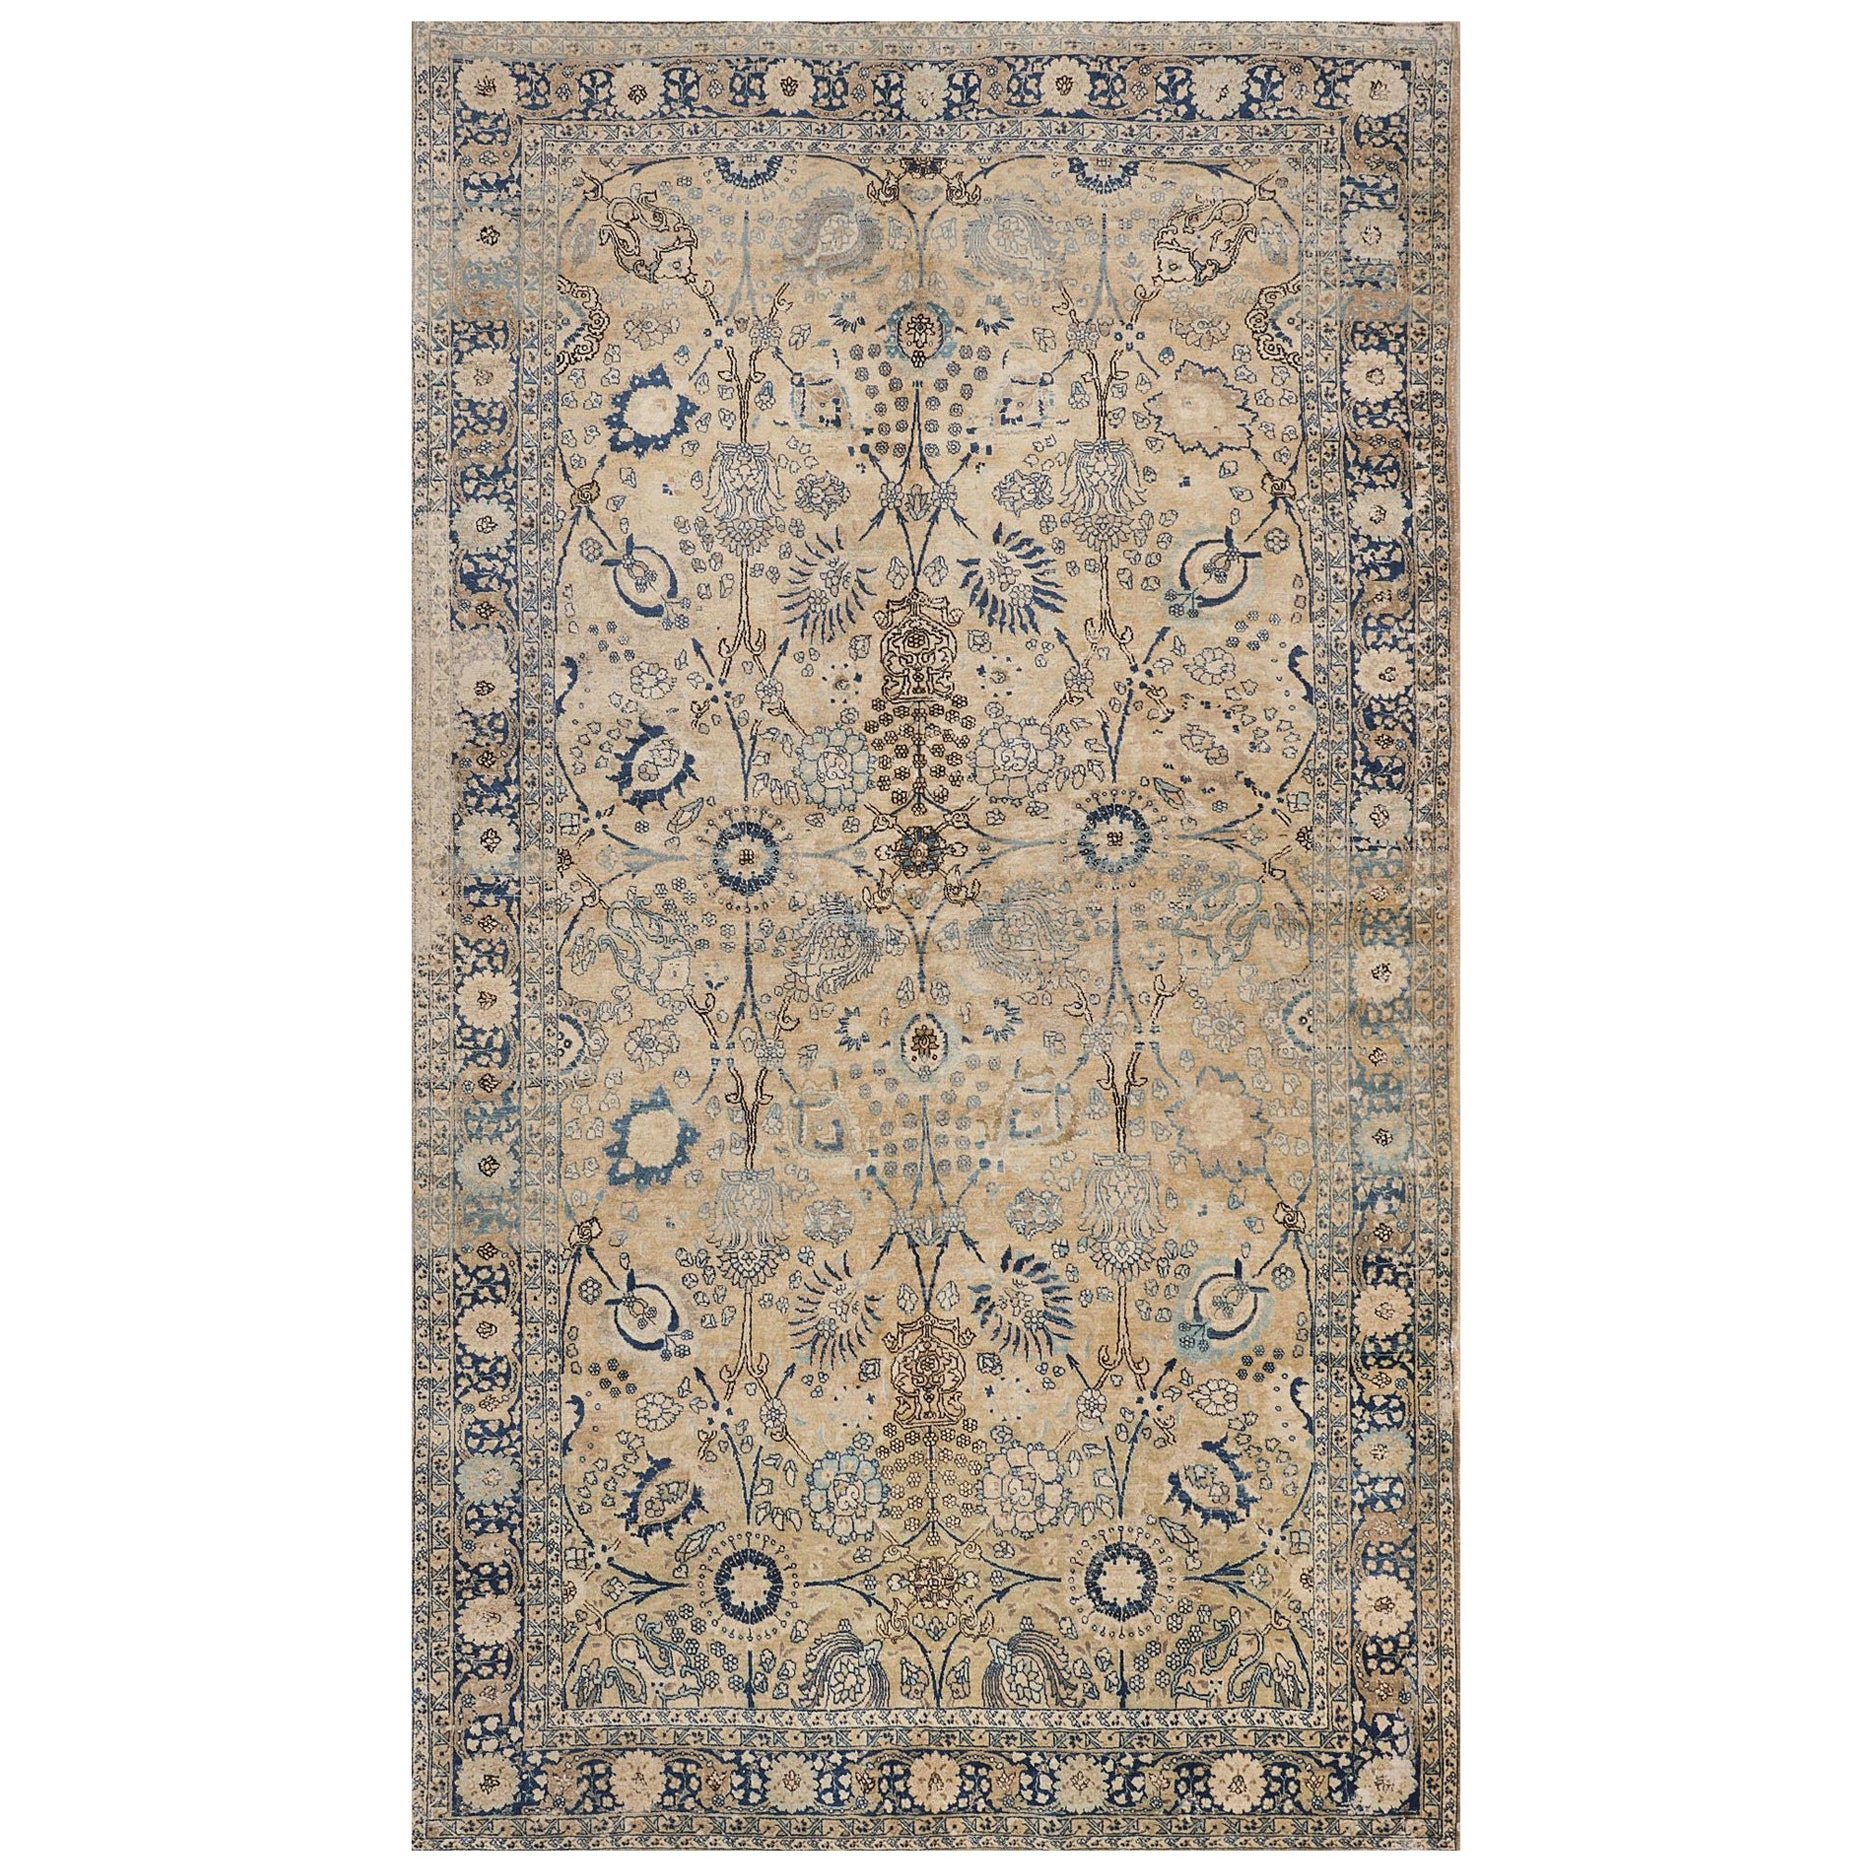 Traditional Hand-woven Blue & Ivory Floral Persian Tabriz Rug